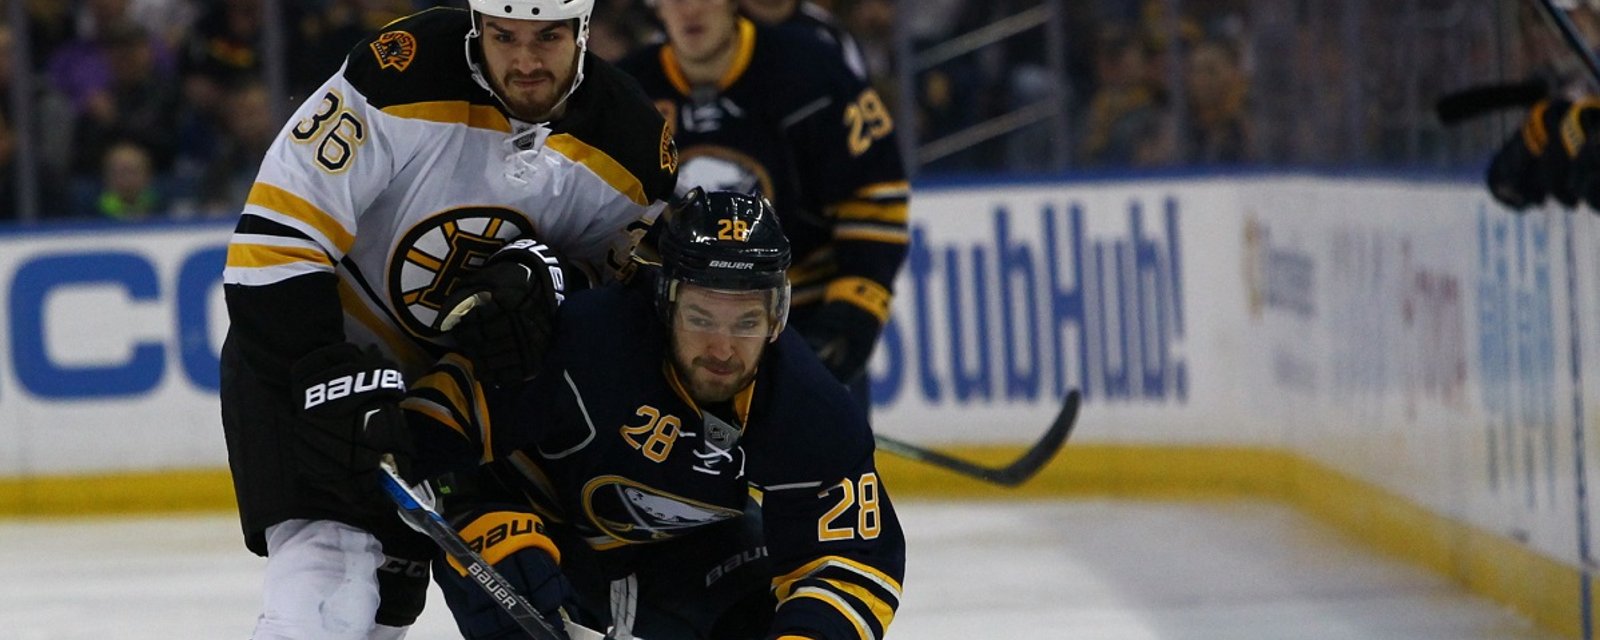 Report: Bruins agitator will not be in training camp due to injury.